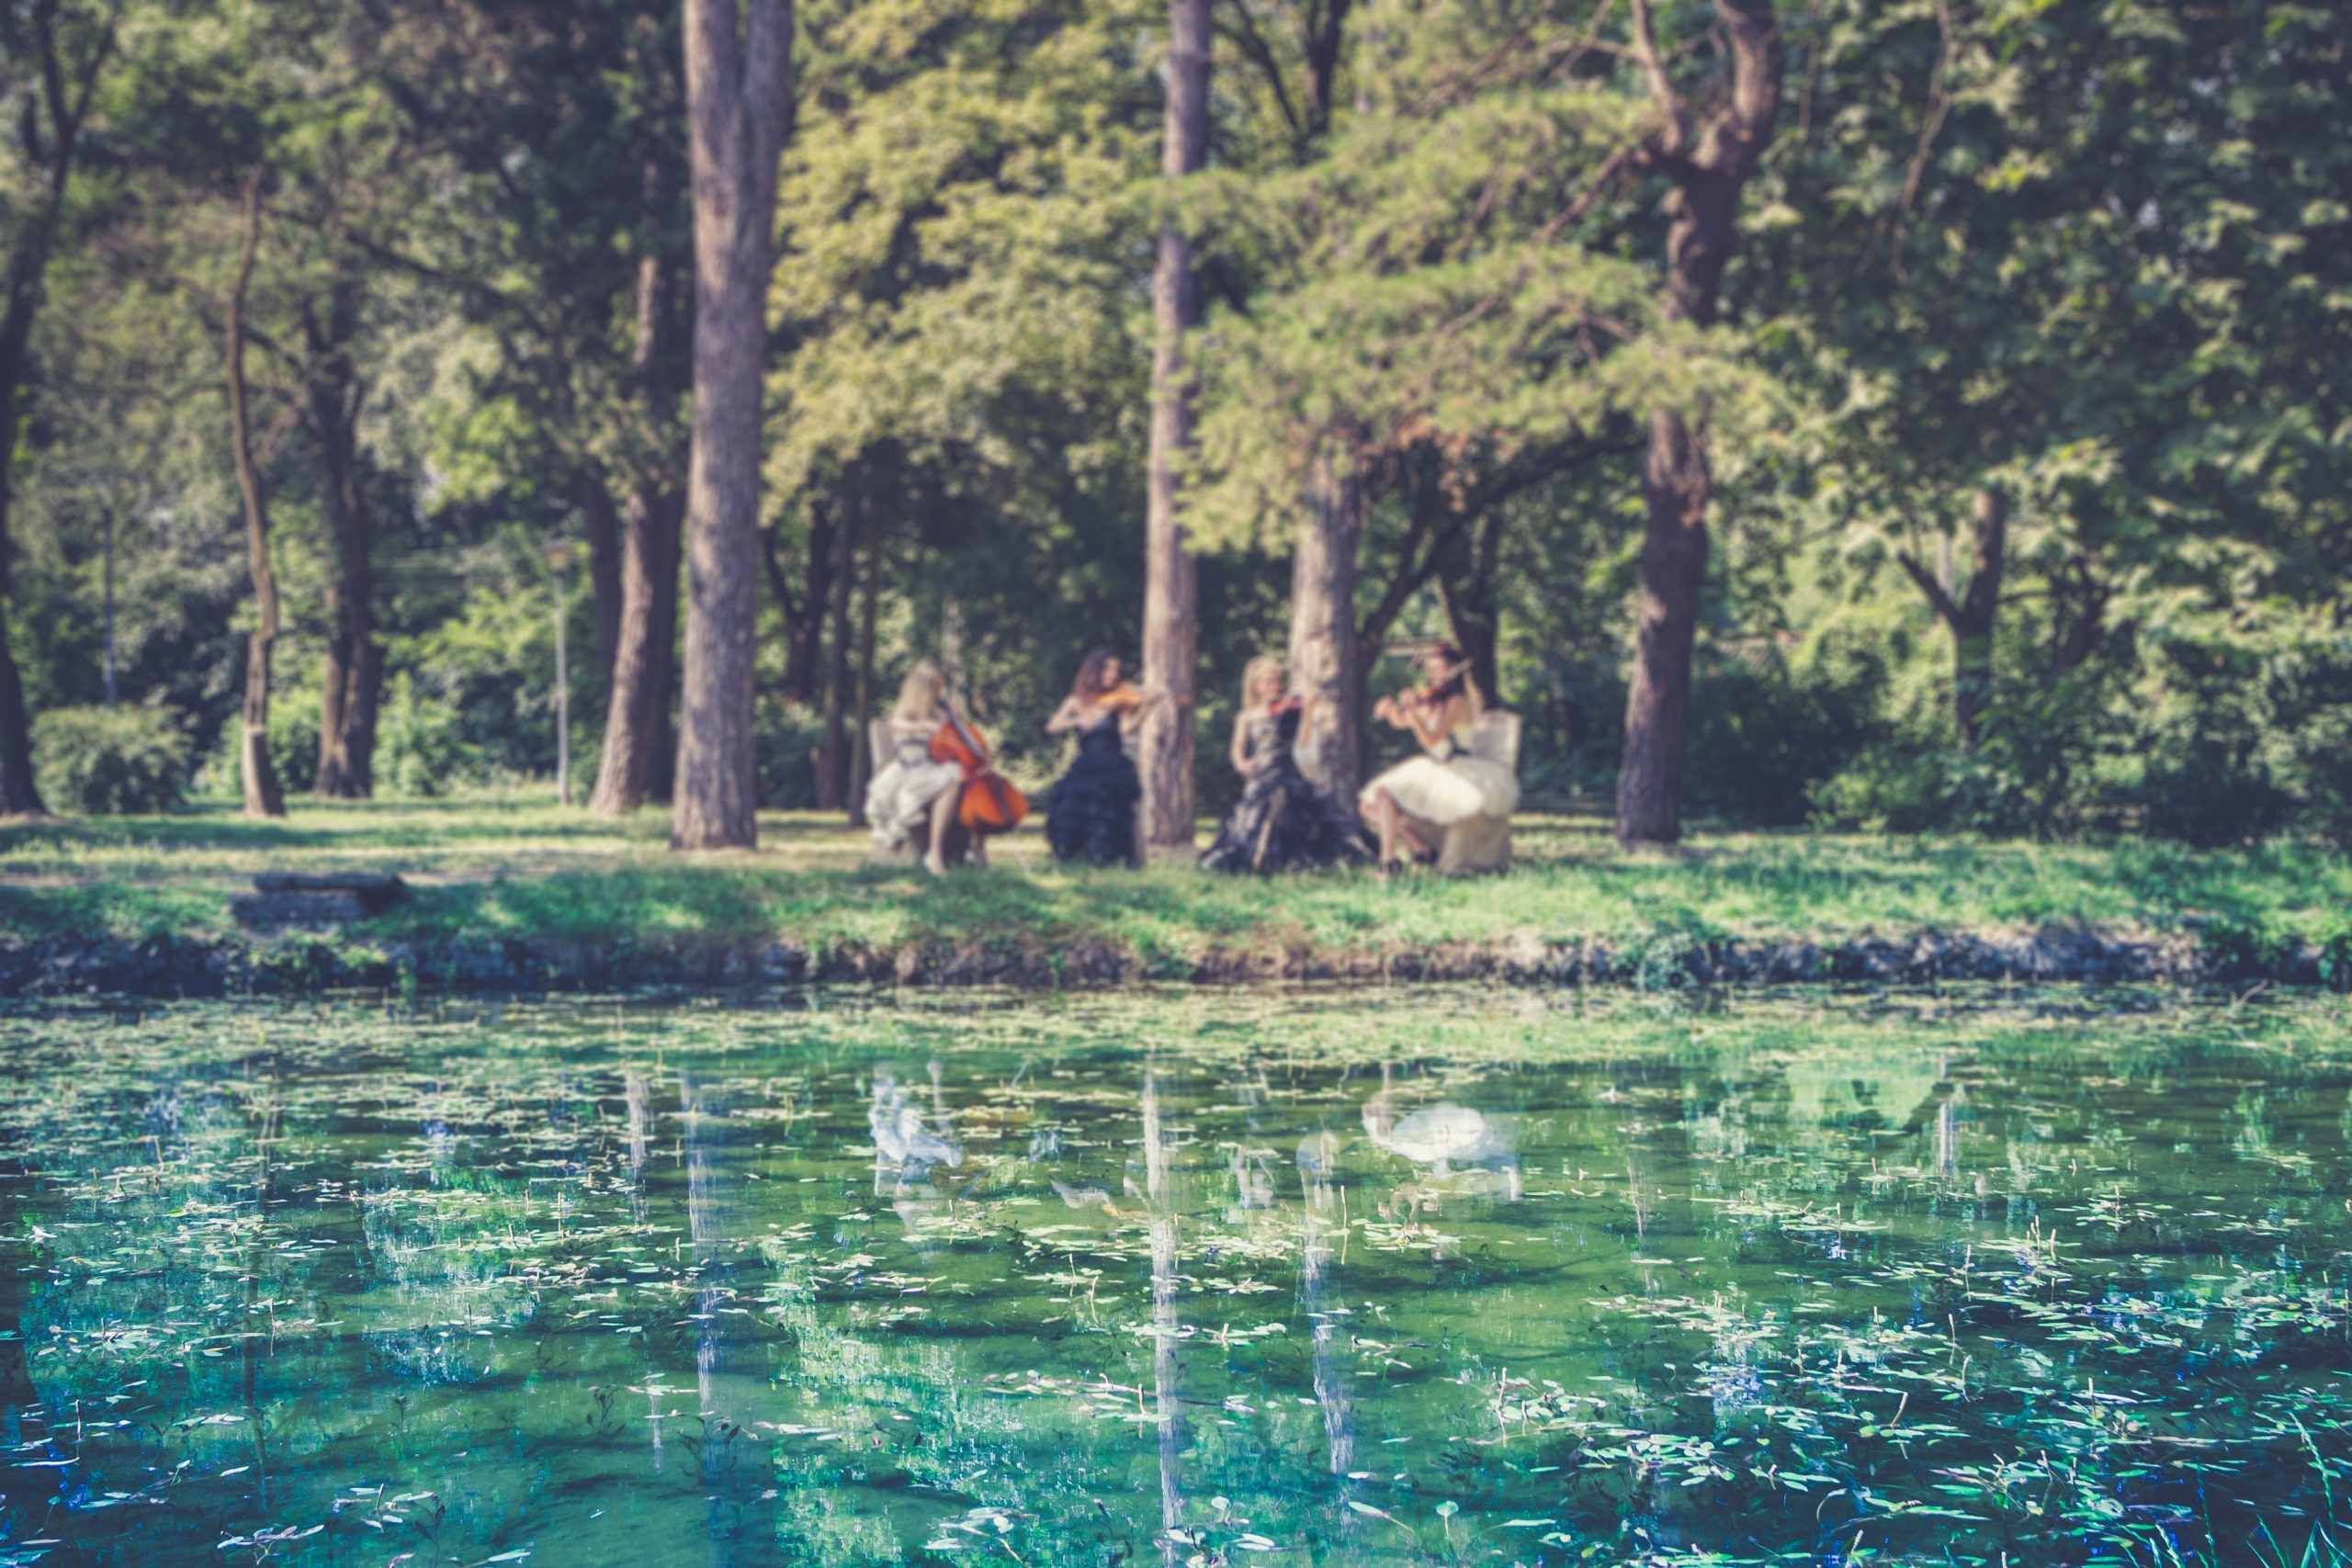 Female quartet playing music in nature by the lake.